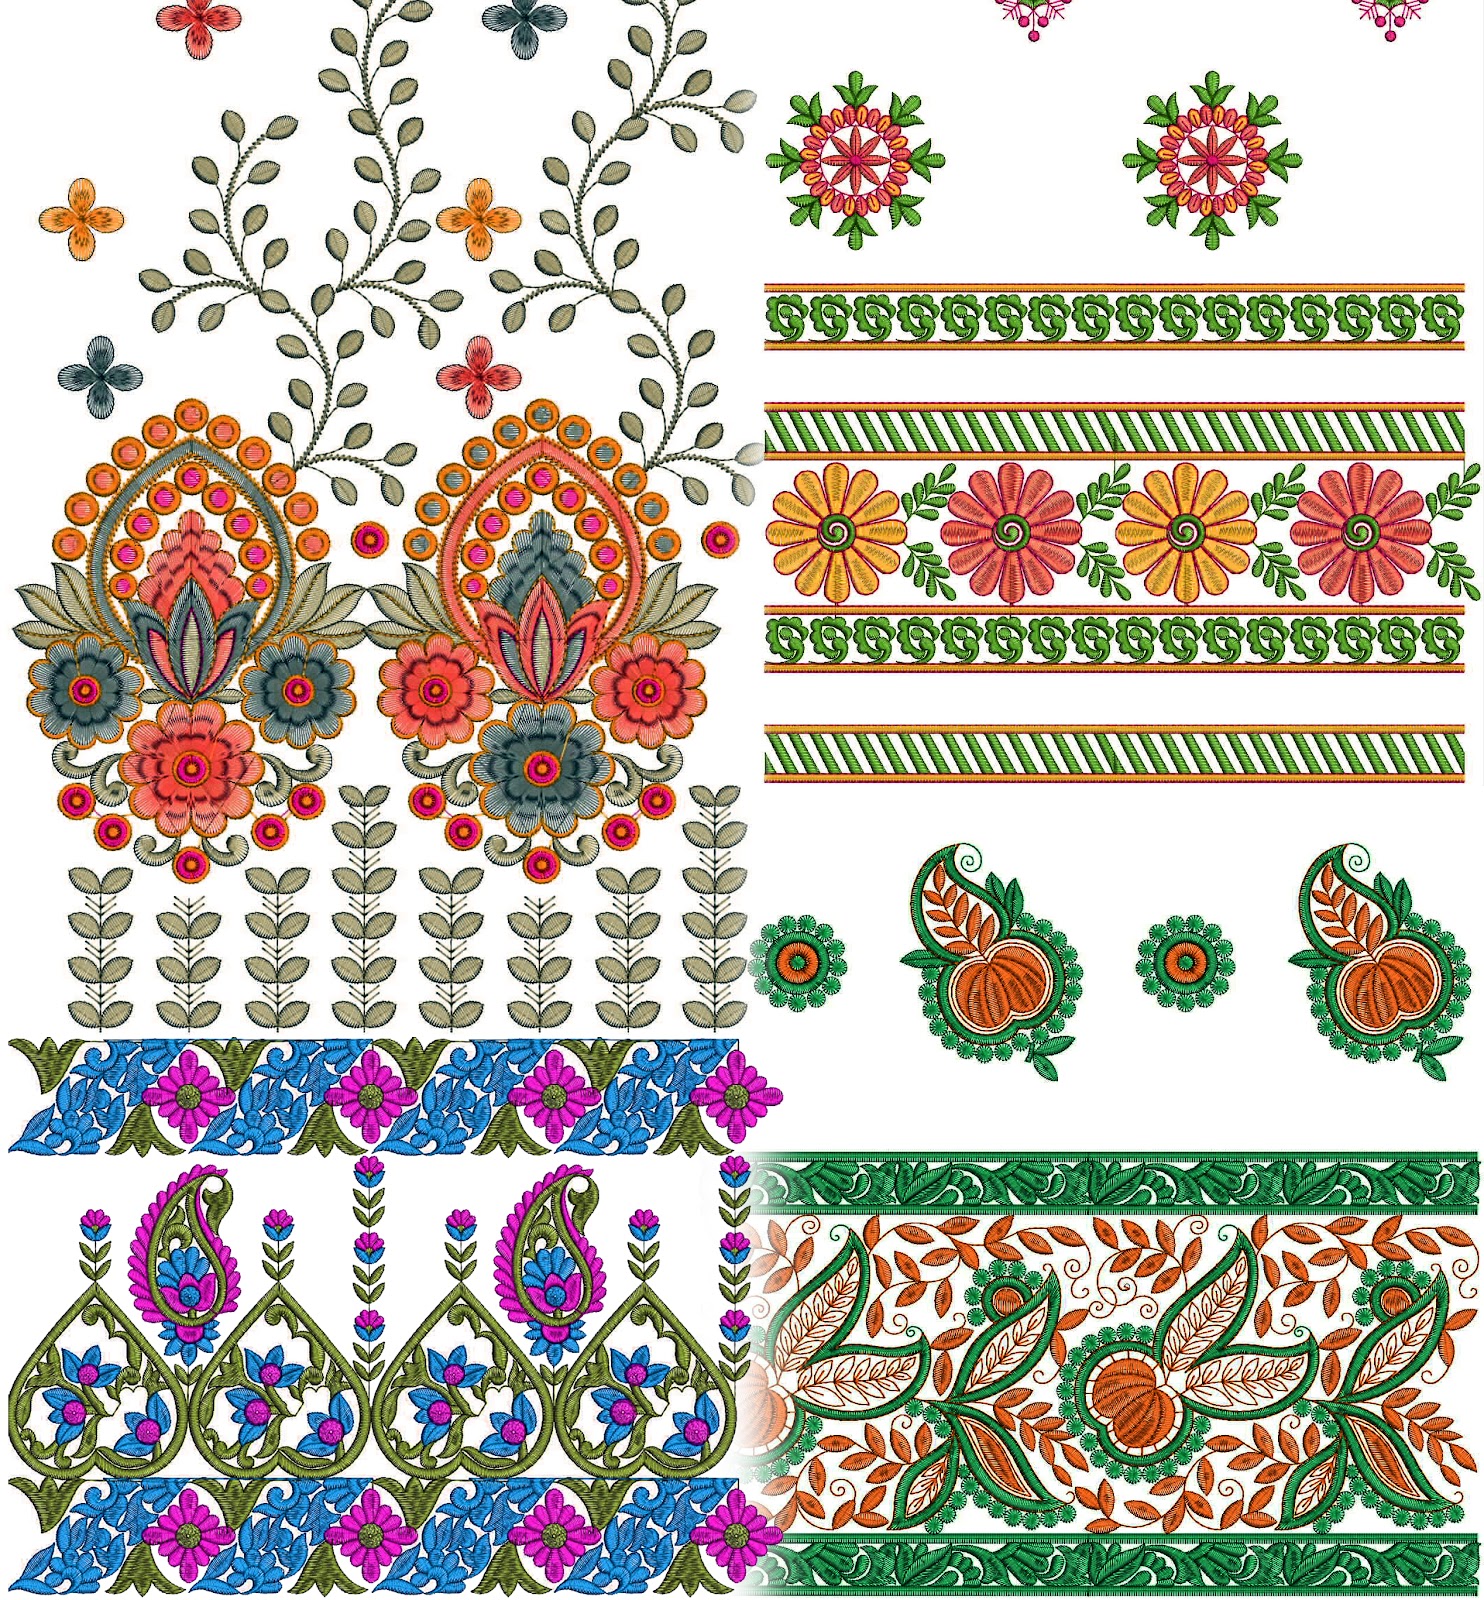 JustDesigns : Listings for new embroidery designs.